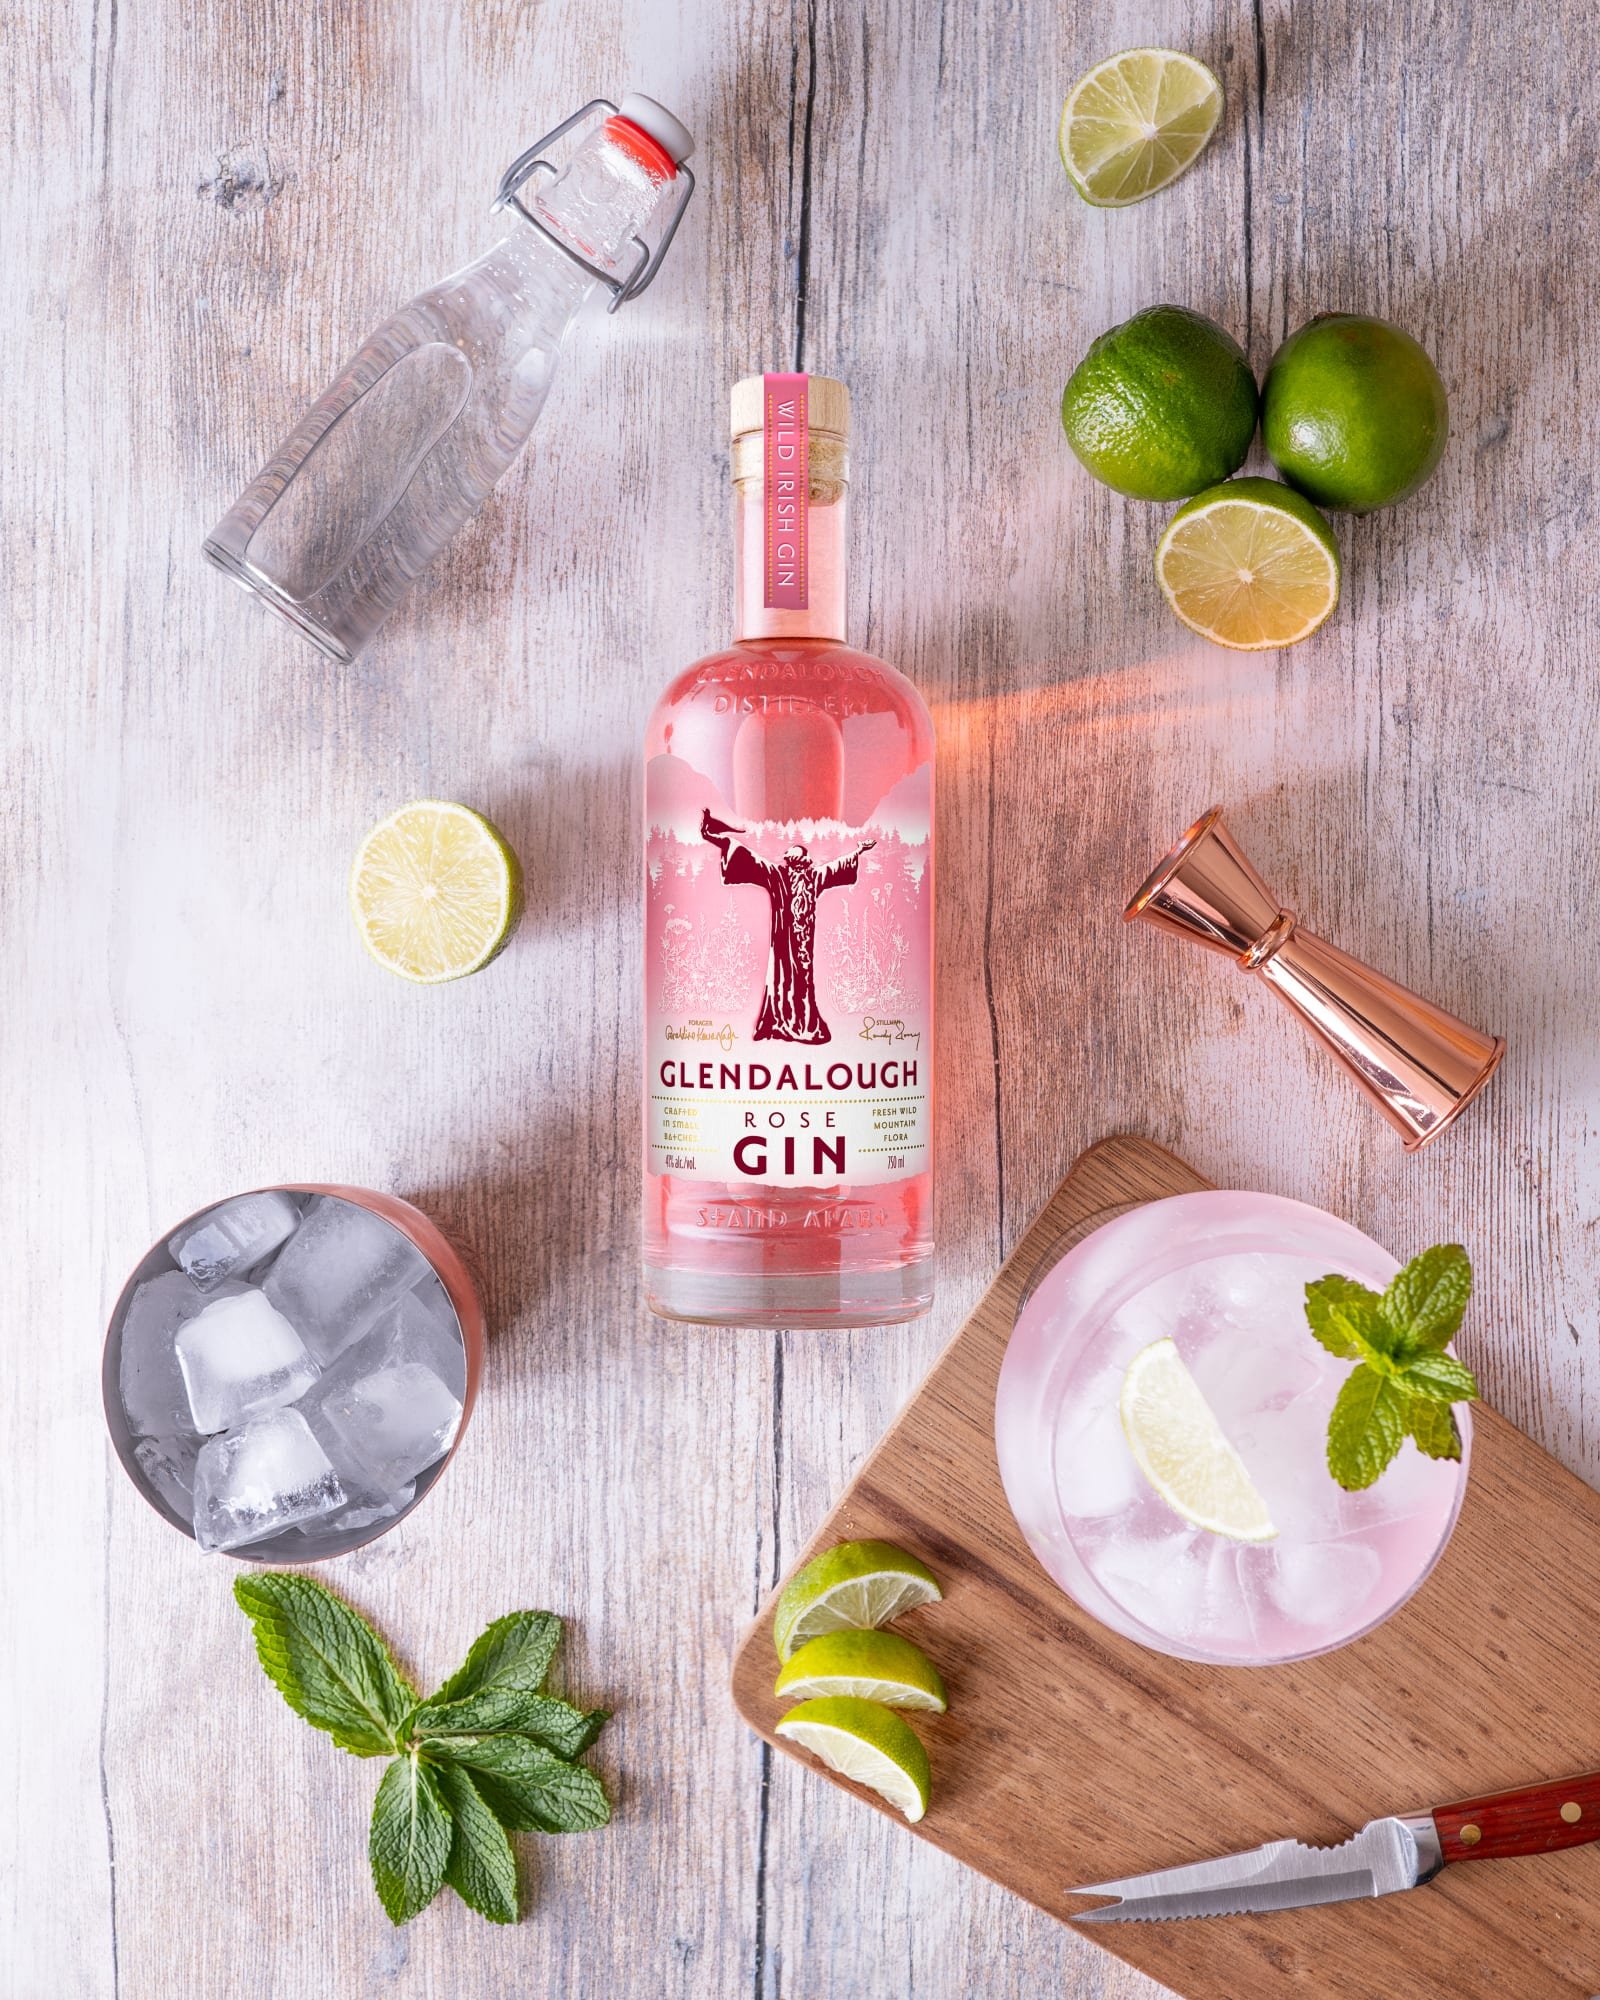 Glendalough Rose Gin is a vibrant gift that deserves to be cherished